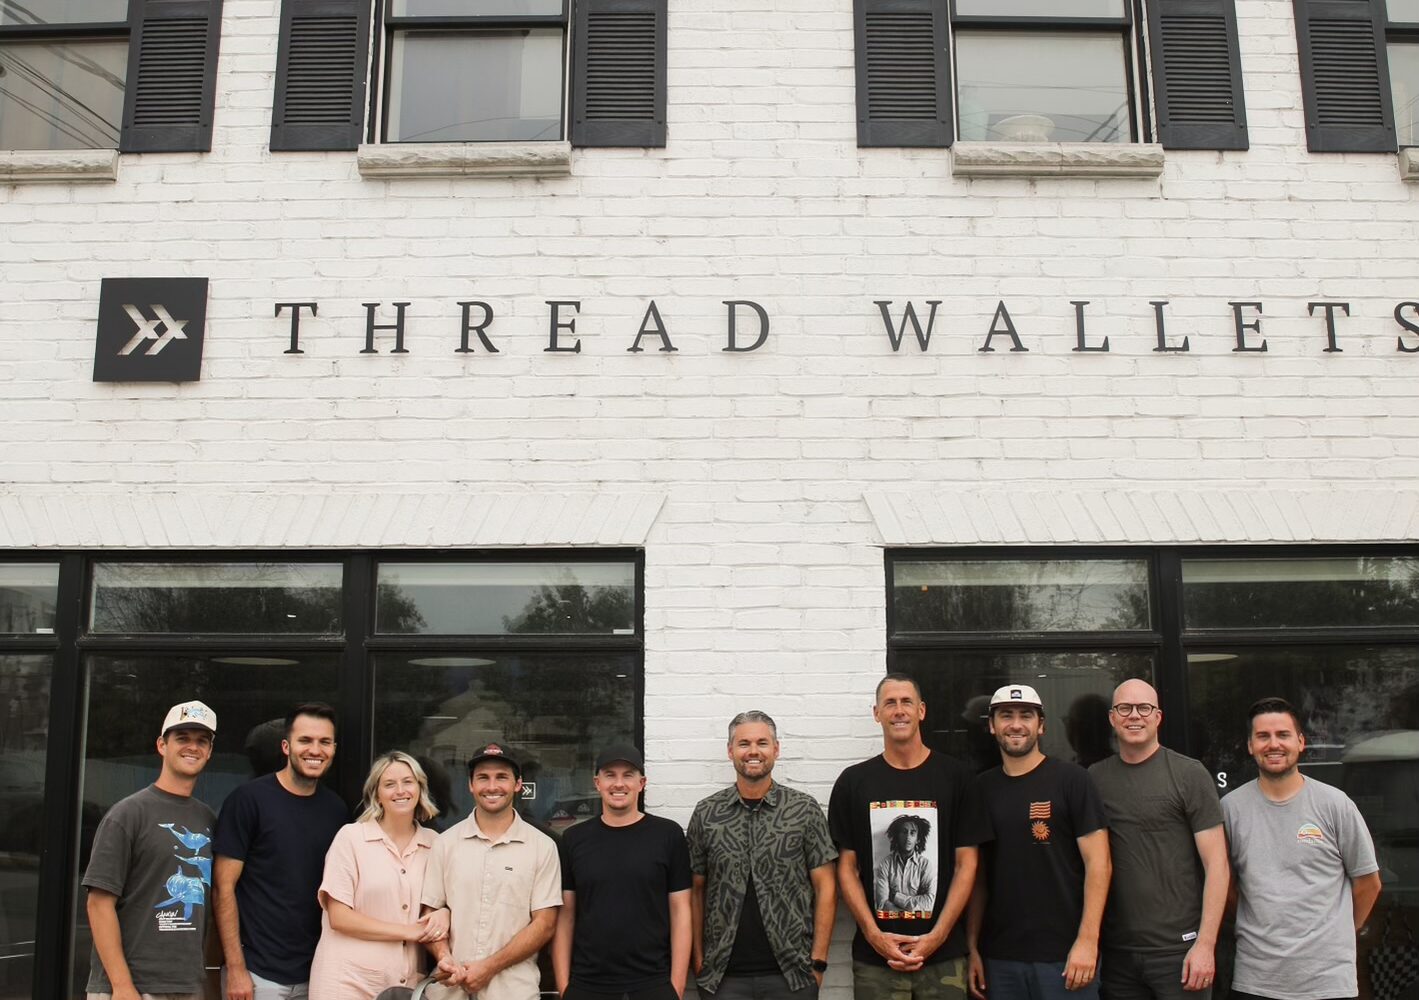 Bauer co-founded Thread Wallets and built on the company’s success to help youth “carry on.”